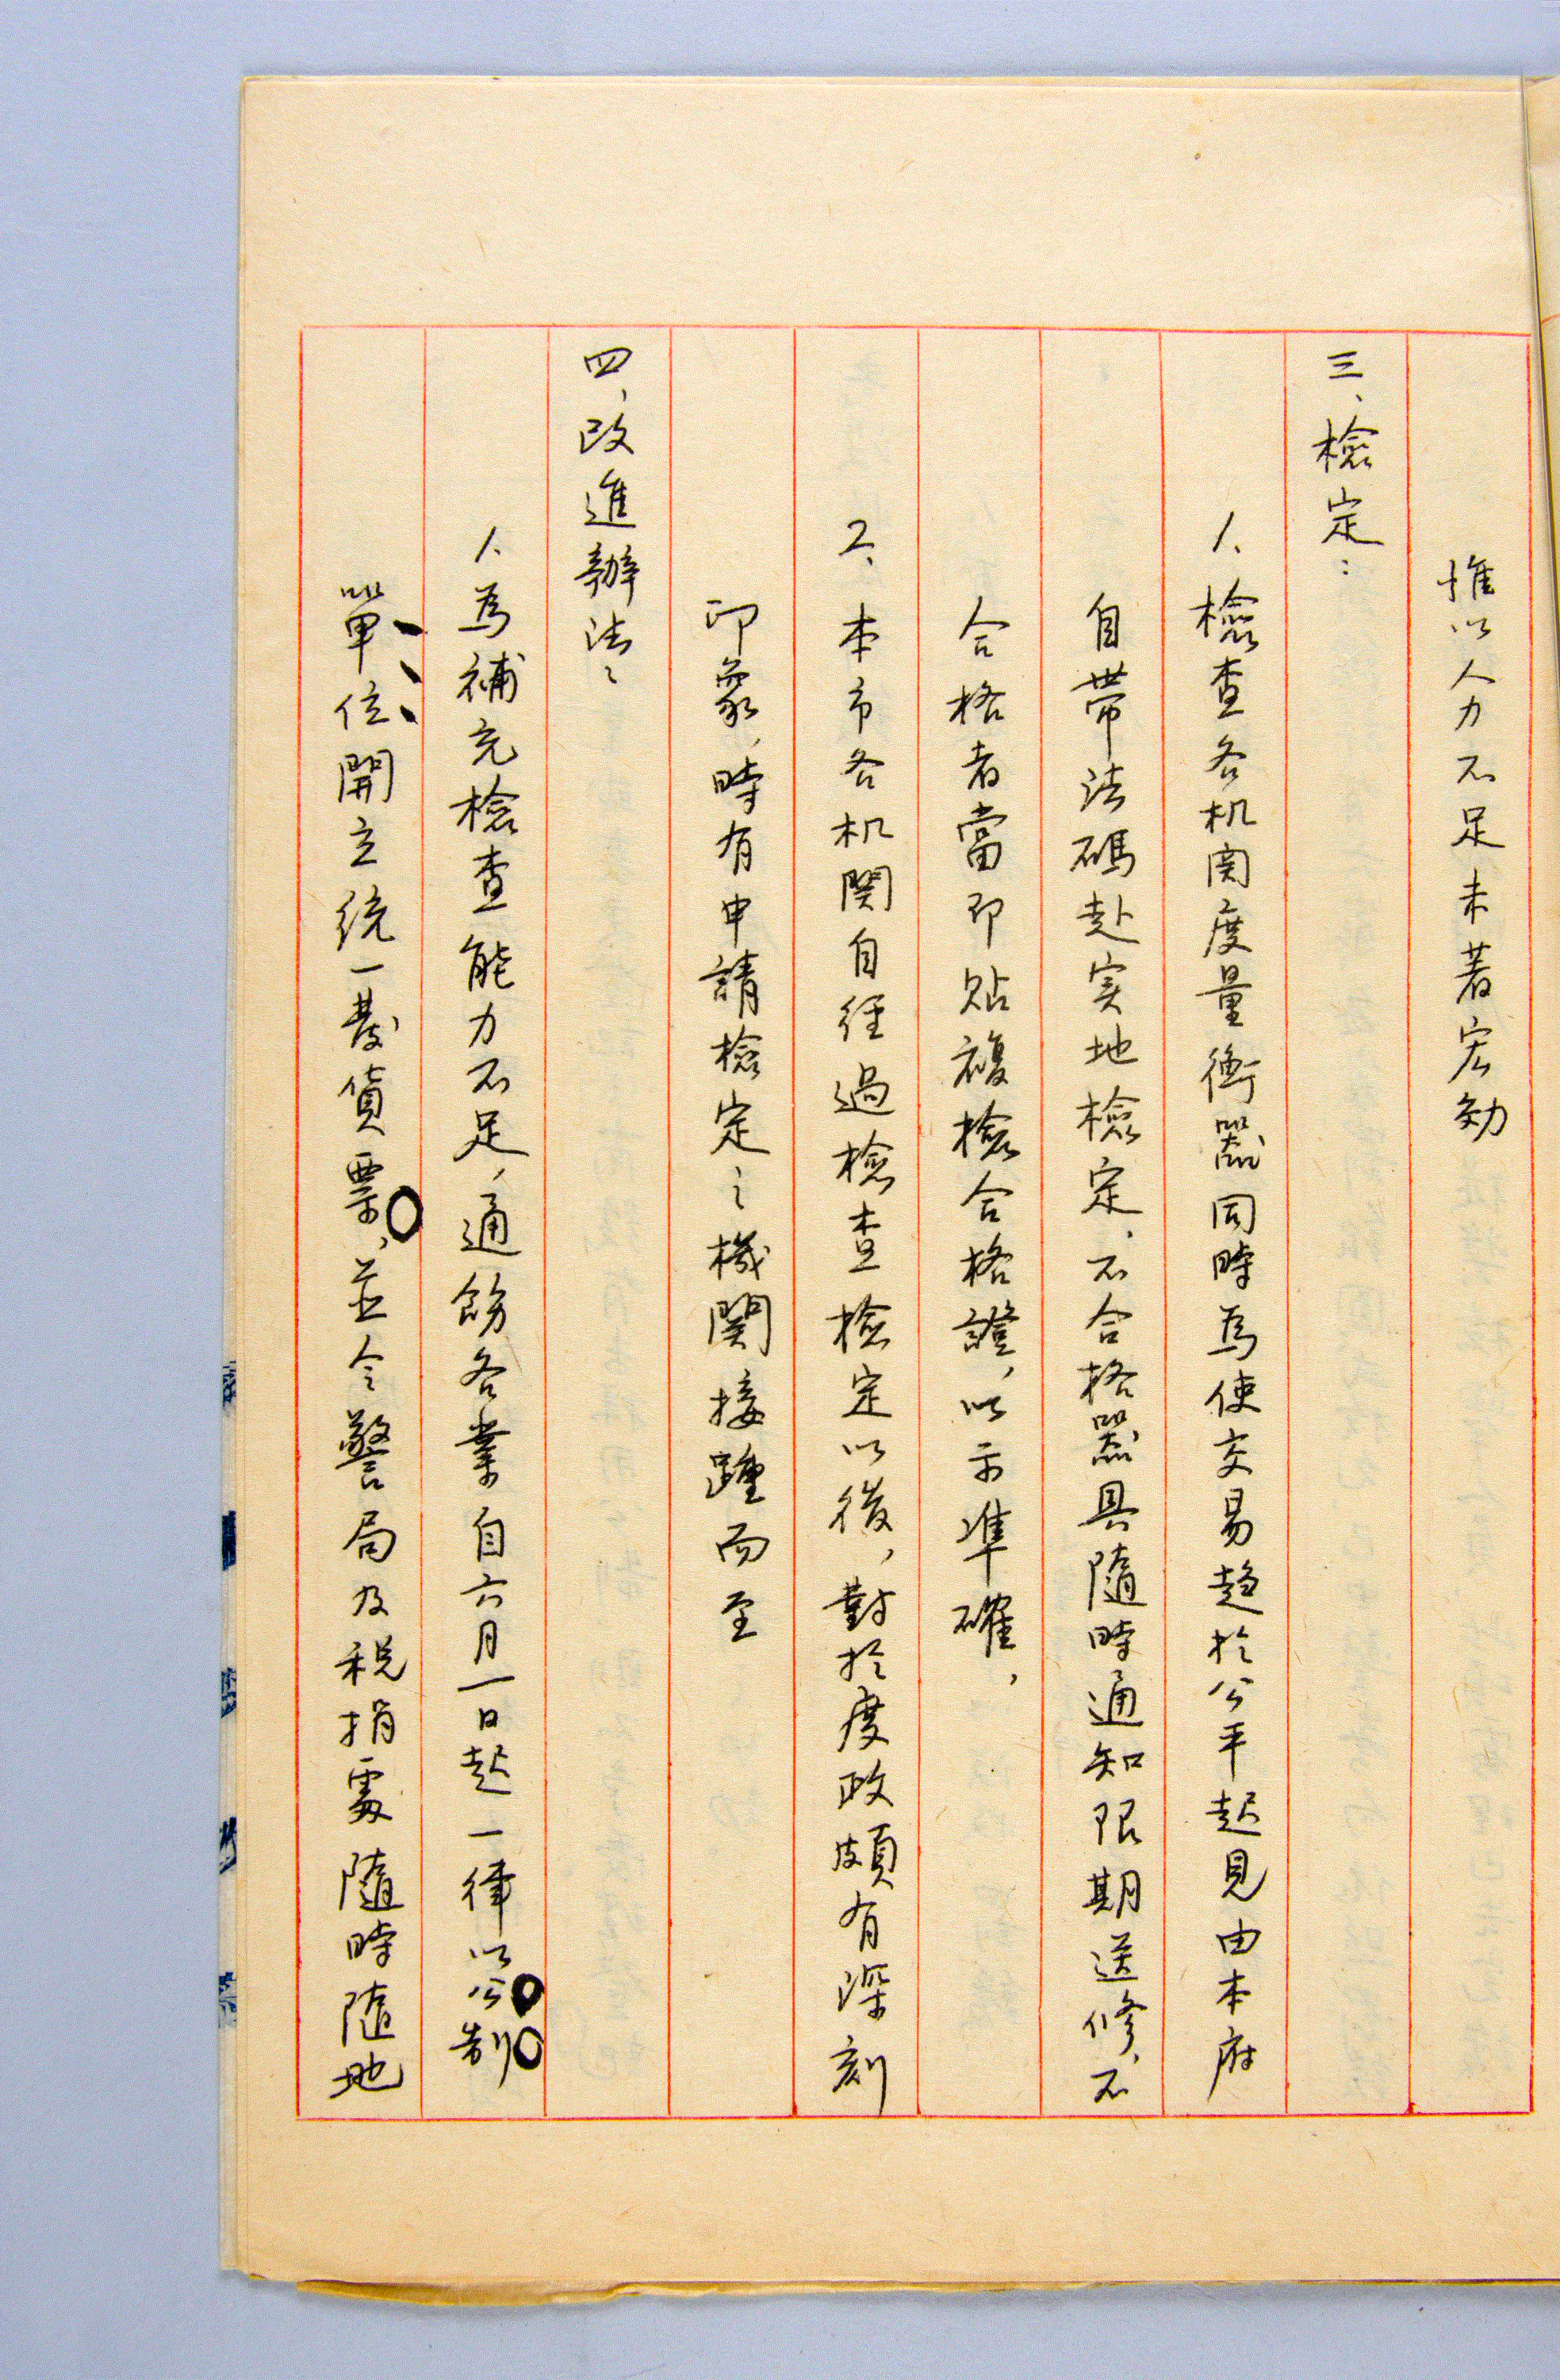 The report of the Hualien County Government's on metrological administration in 1951